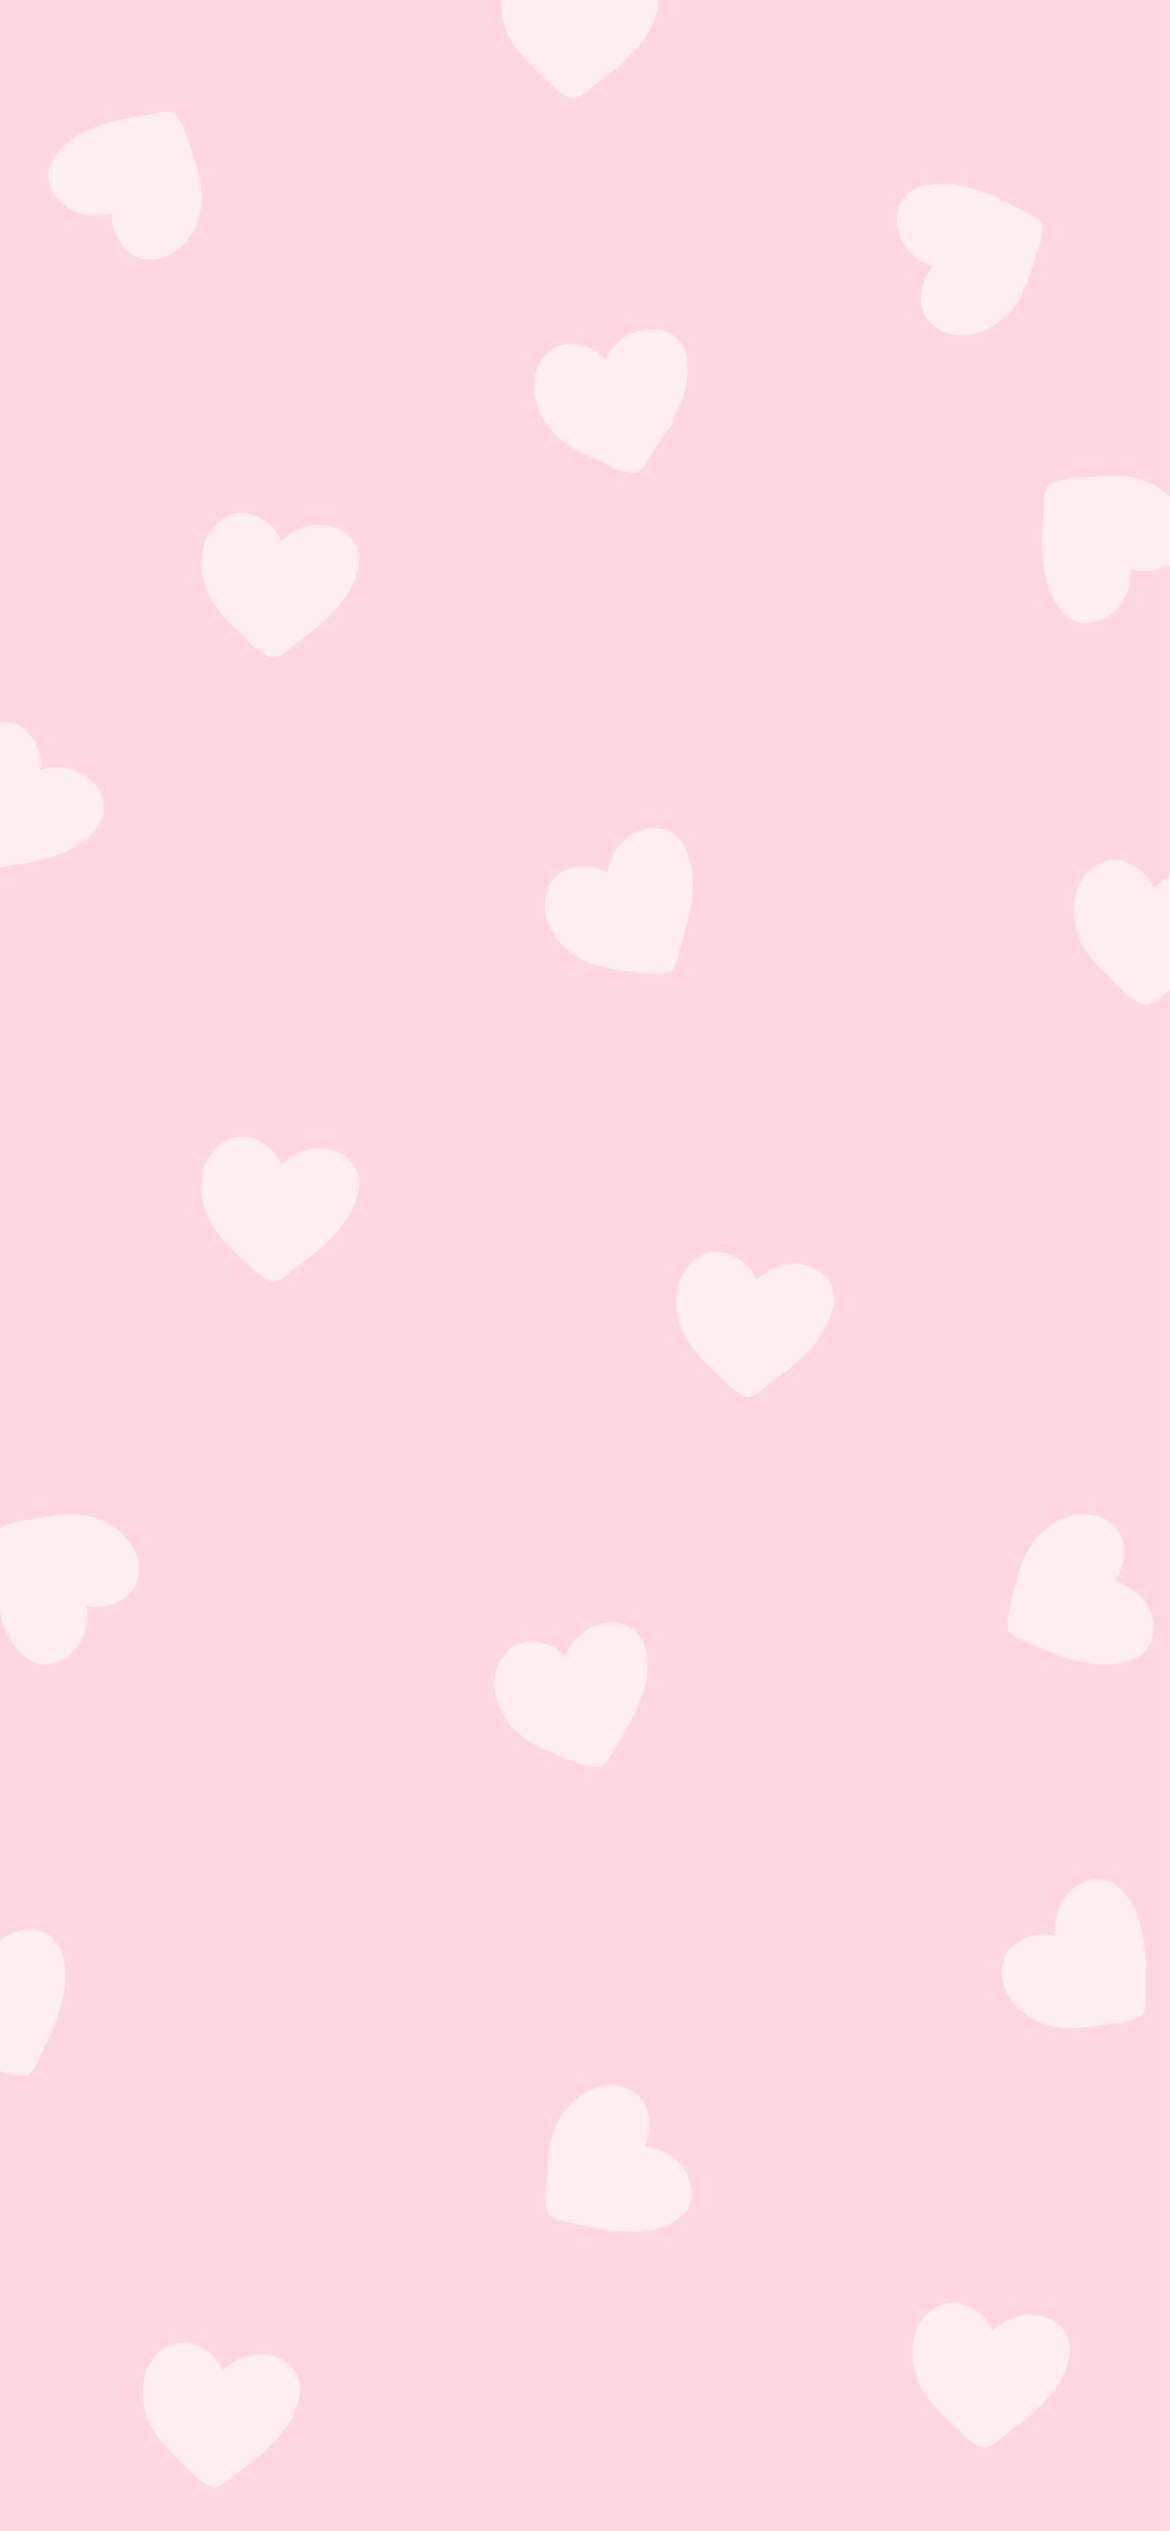 Aesthetic Pink Valentine Wallpapers - Wallpaper Cave